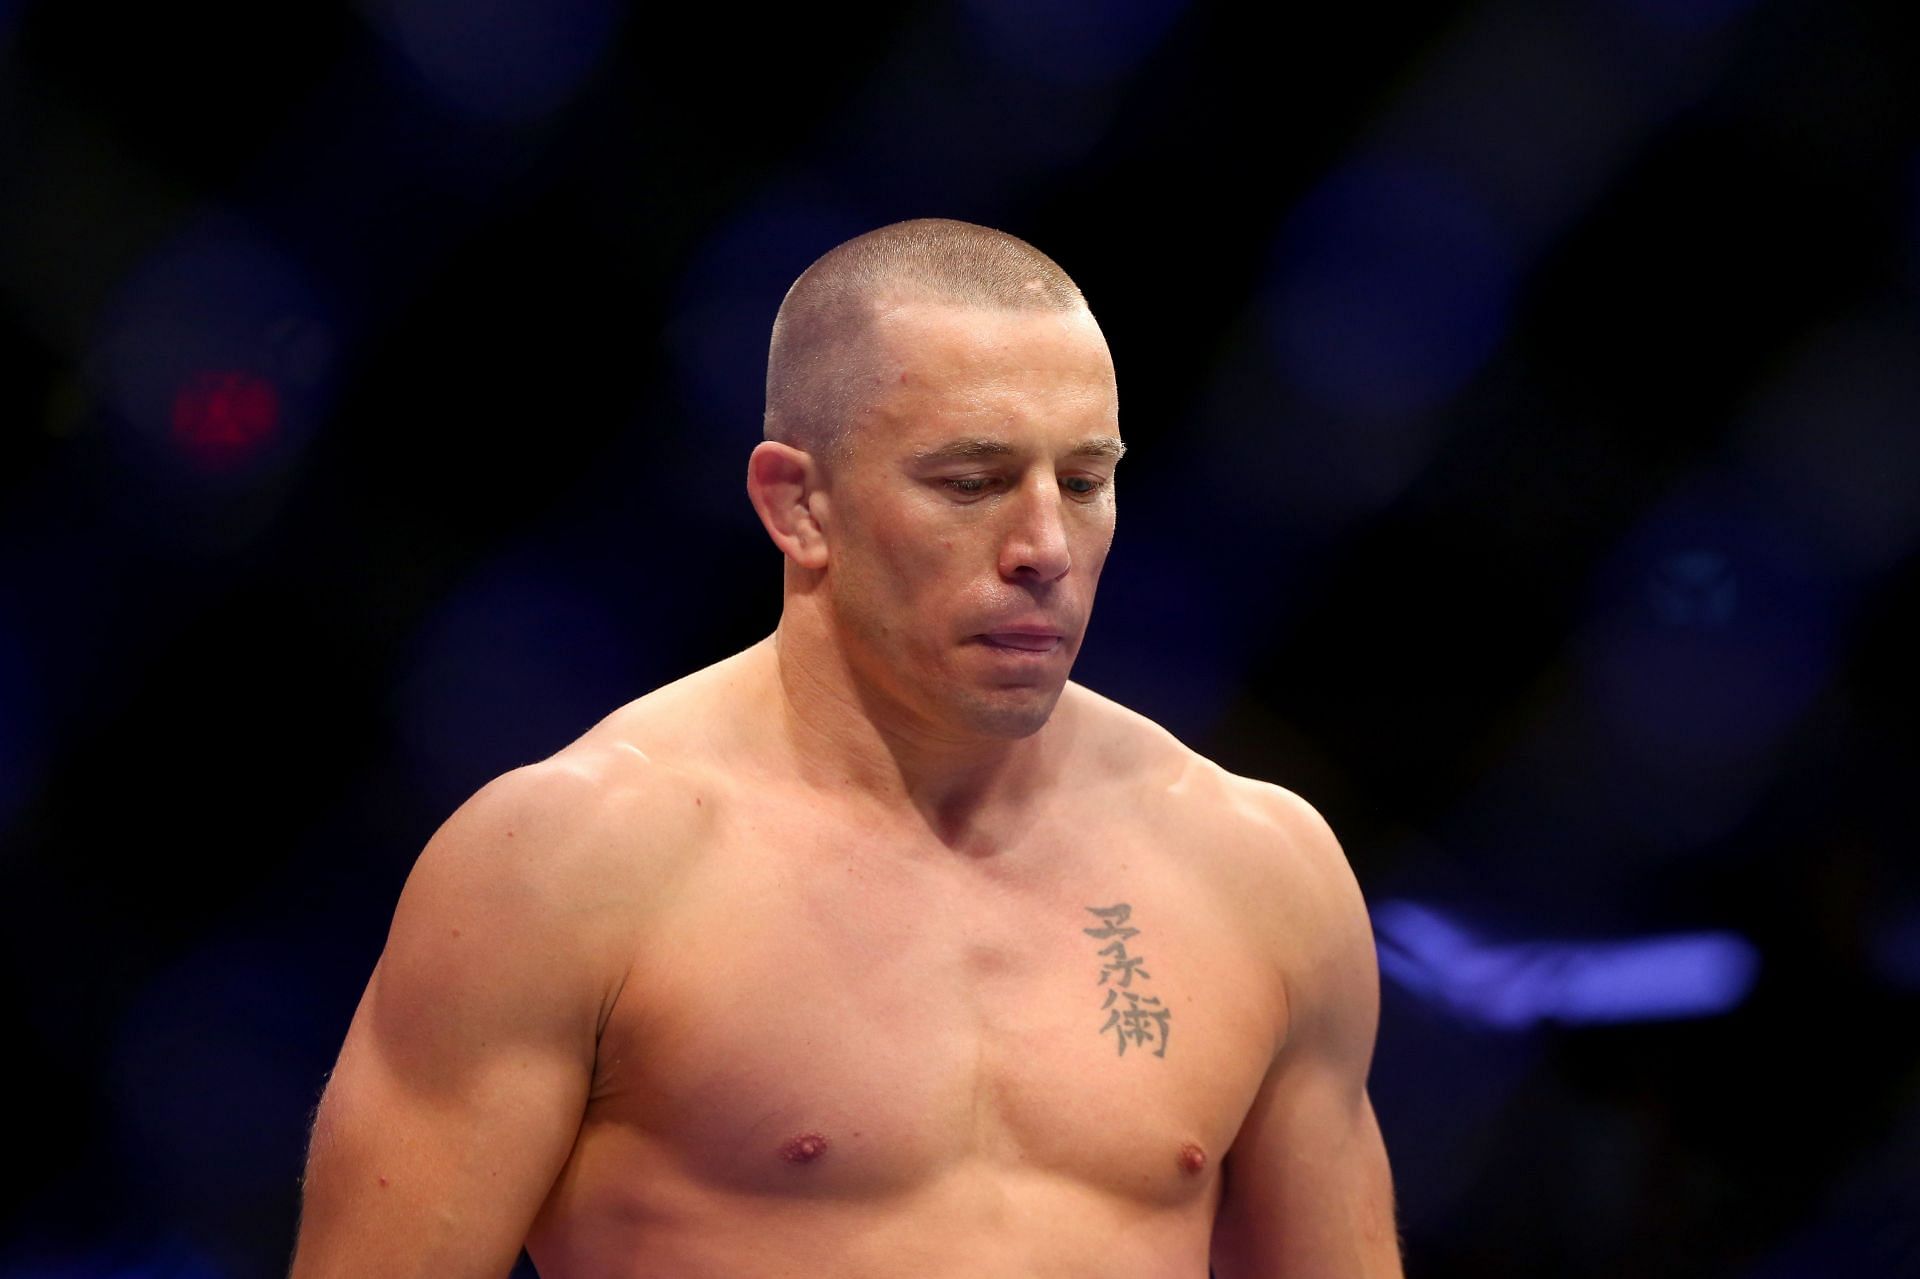 Georges St-Pierre has a professional record of 26-2